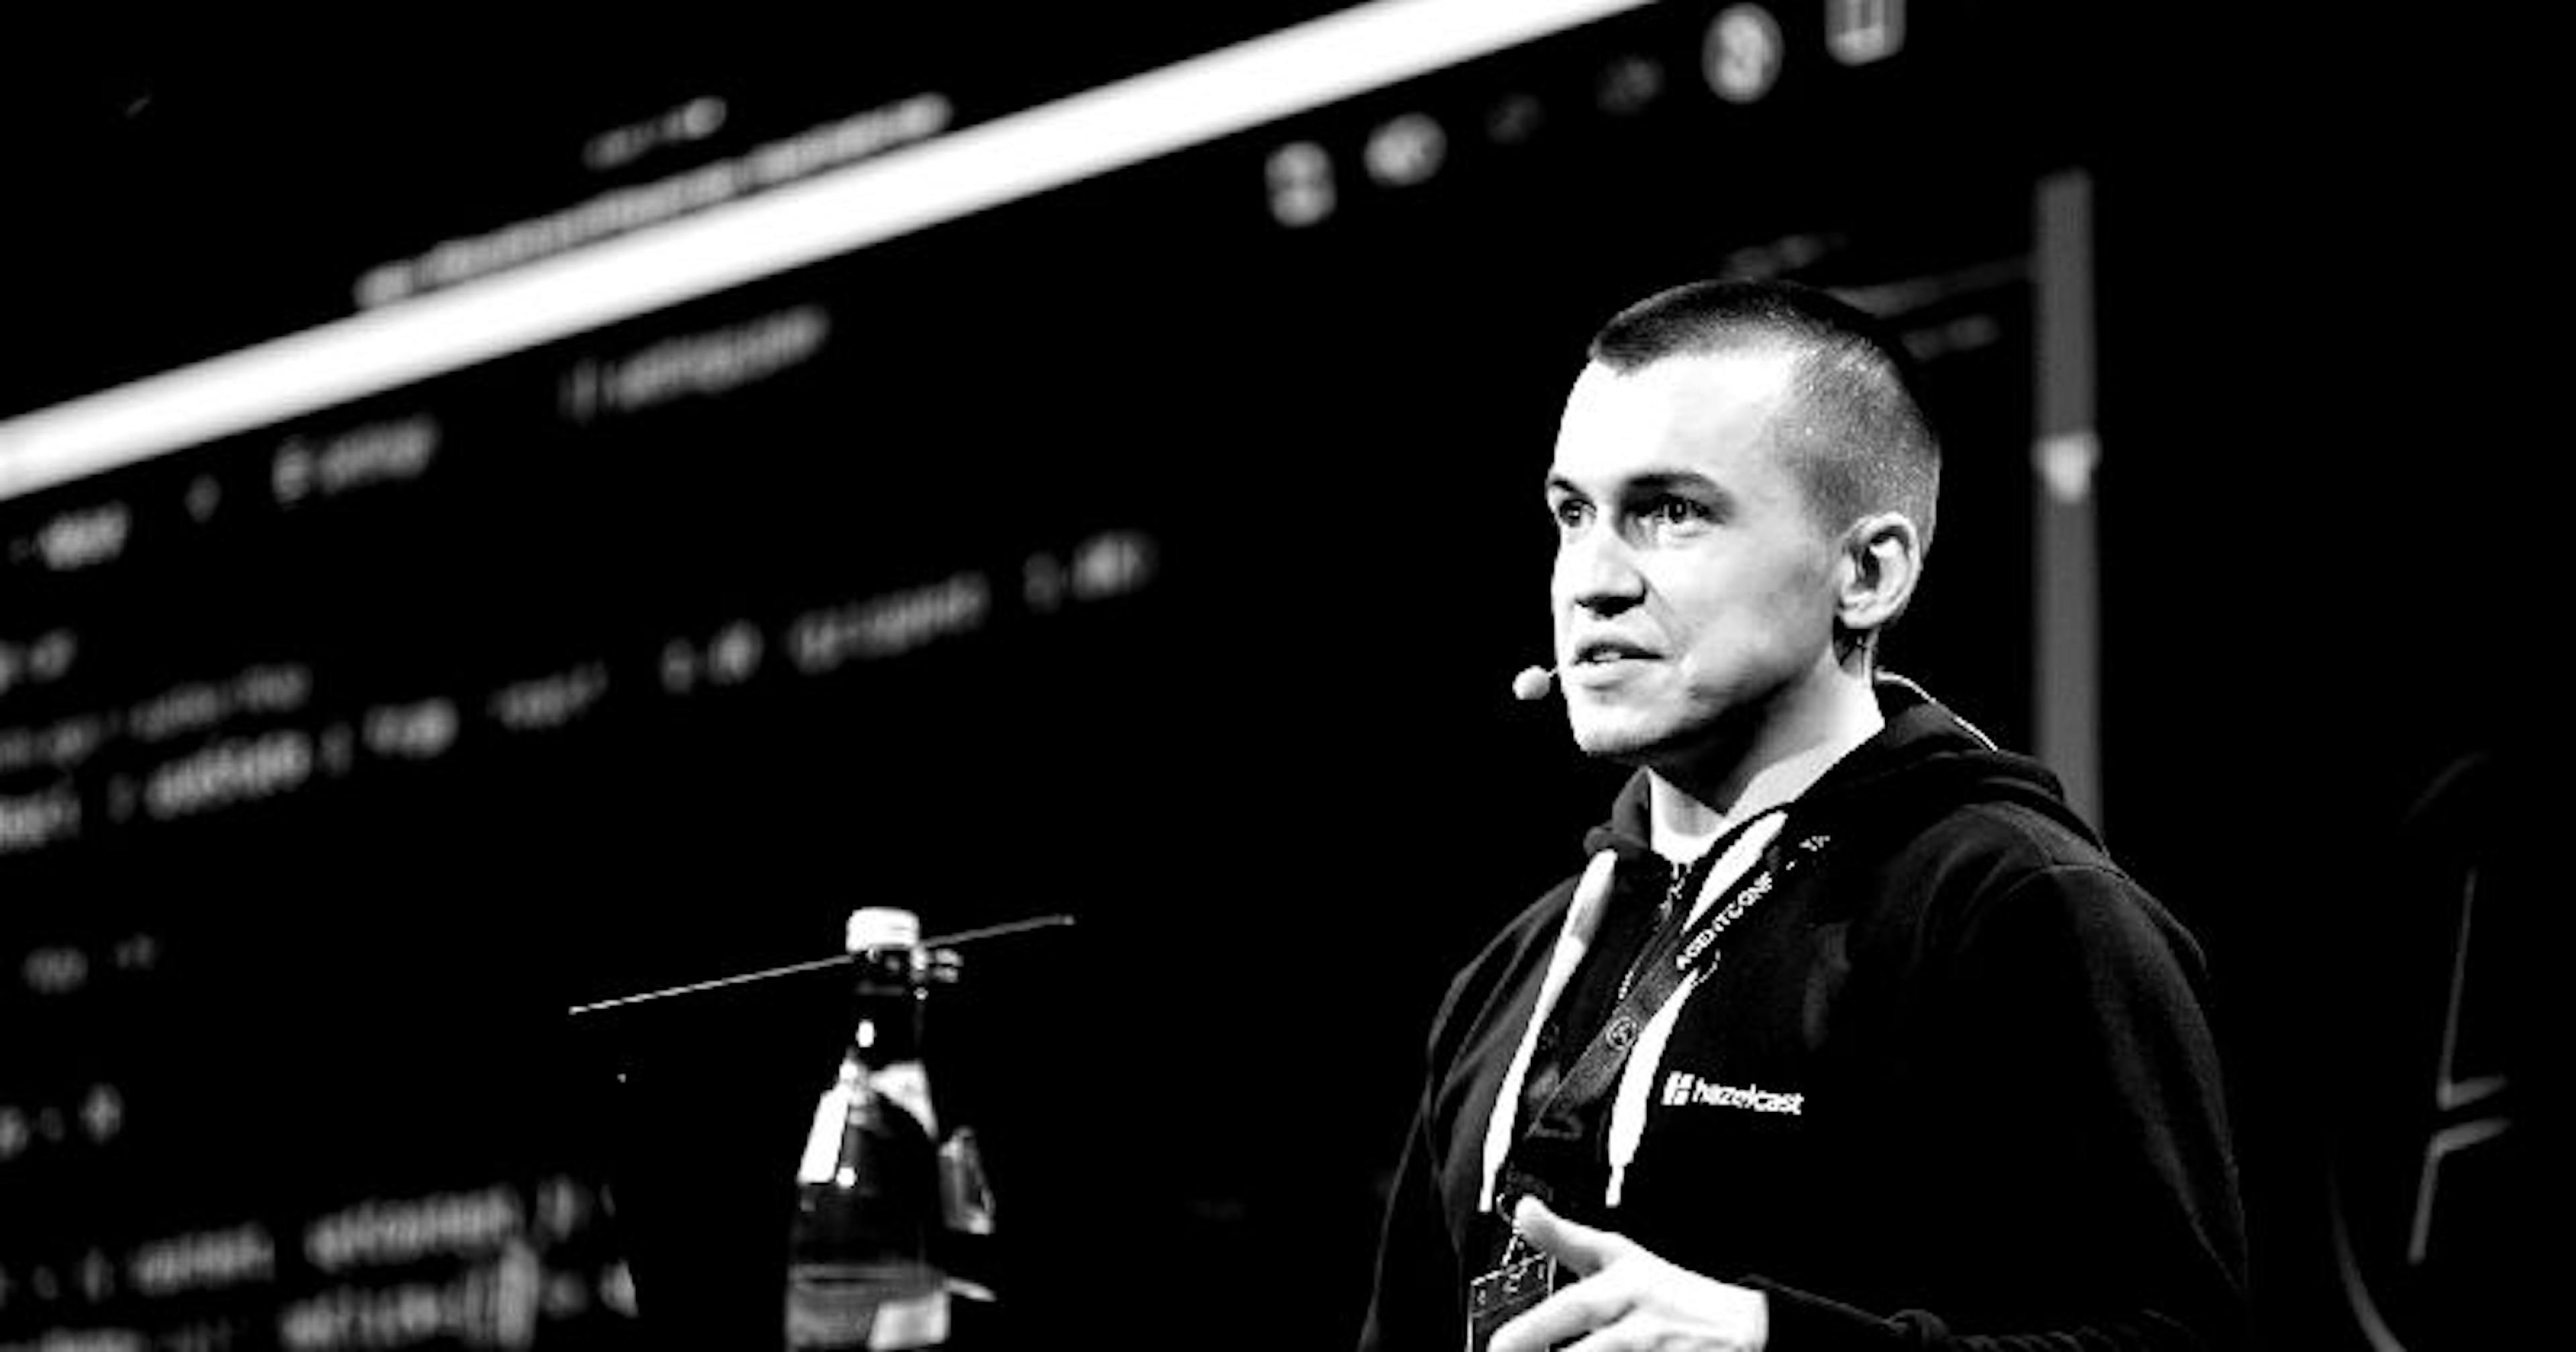 /on-developing-career-in-tech-with-andrey-goncharov-senior-software-engineer-at-facebook feature image